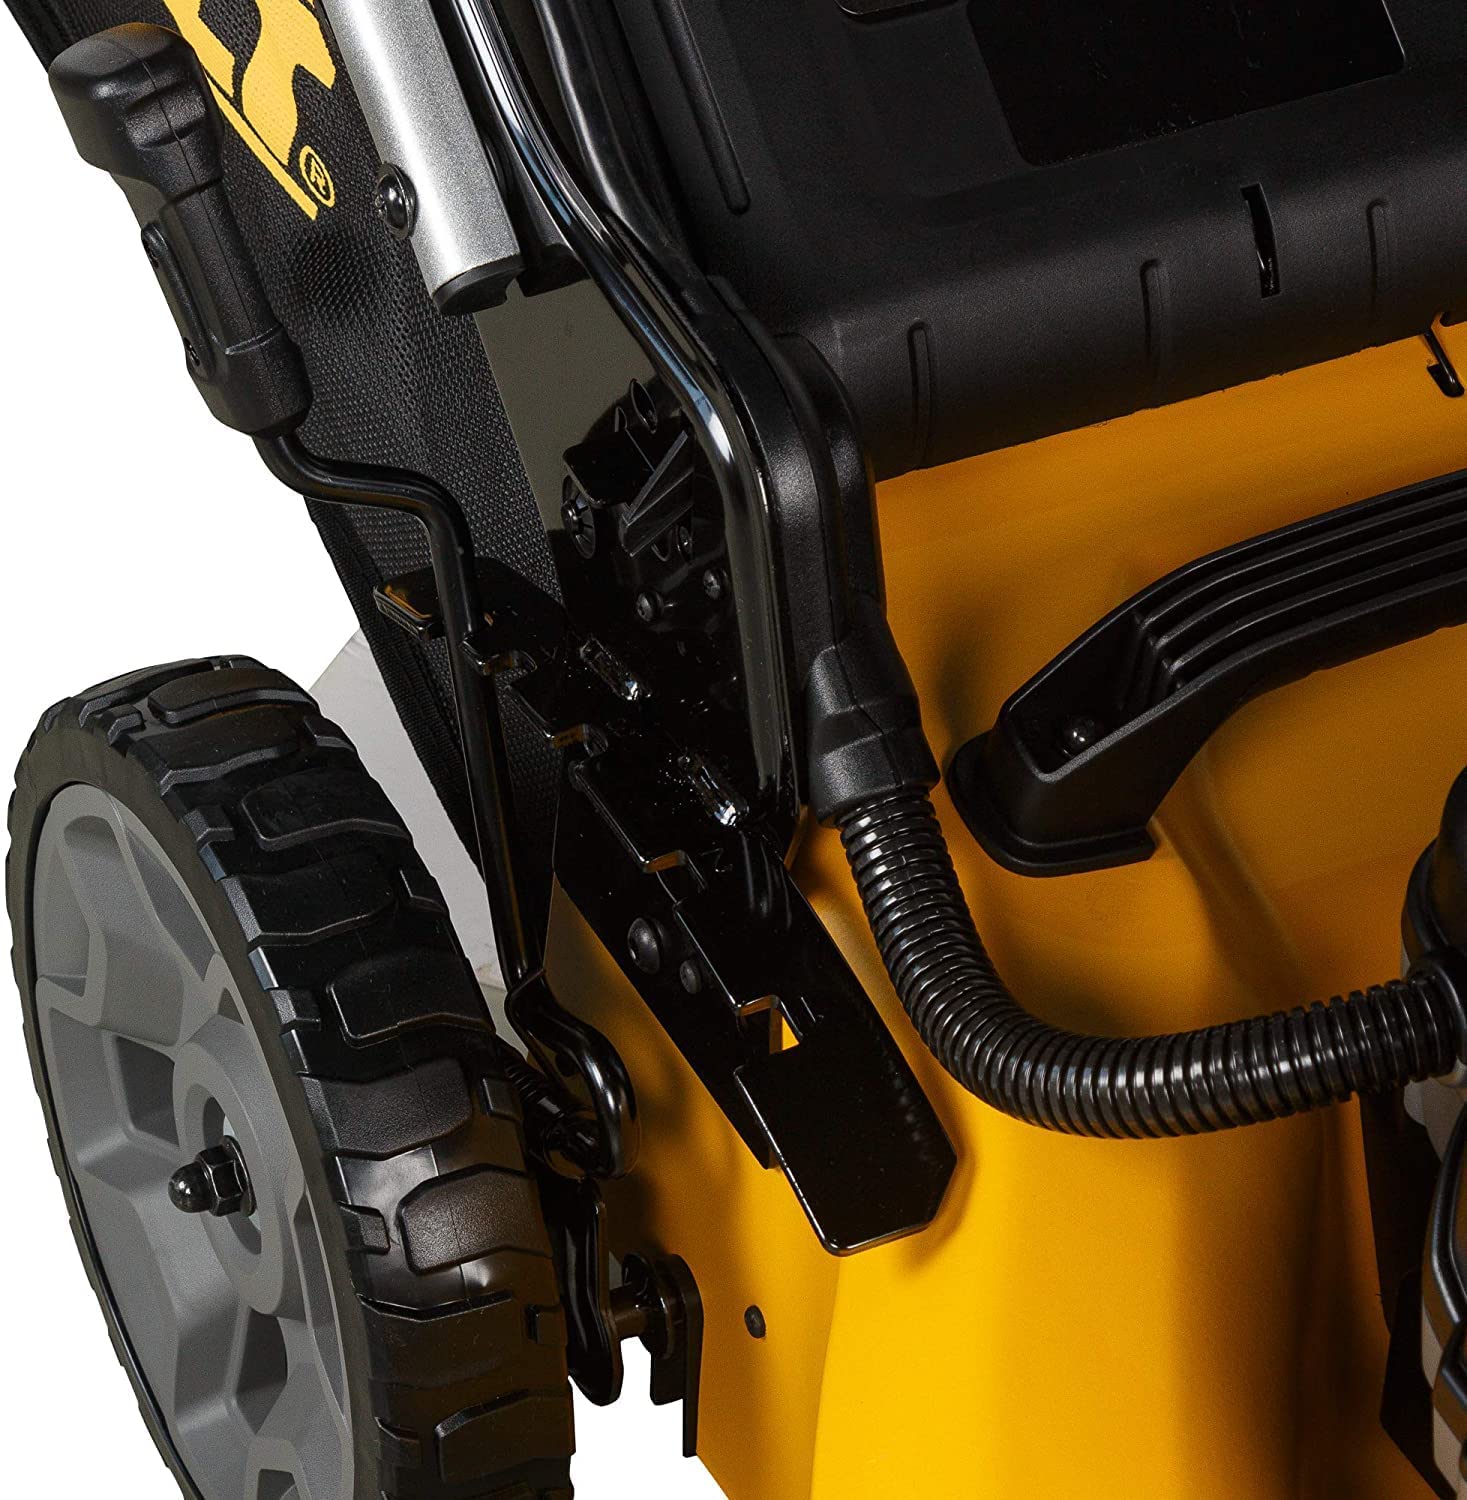 Dewalt Lawn Mower Review Editor's Pick of 2023 and Buyer Guide